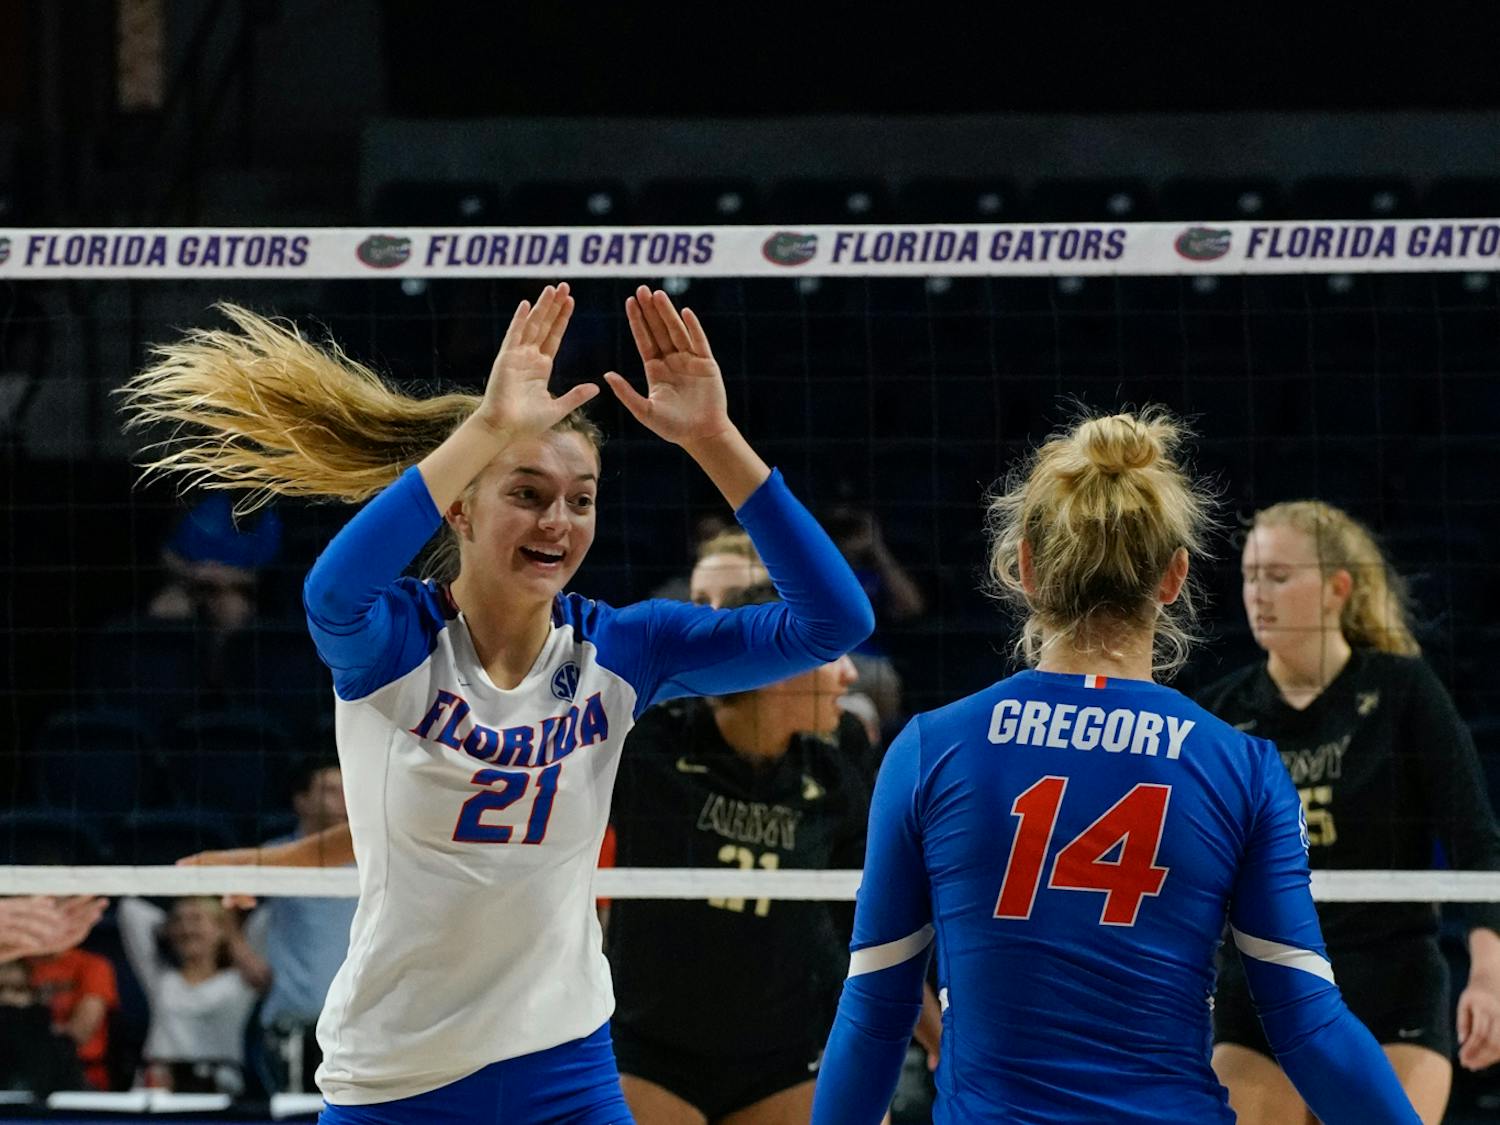 Freshman setter Marlie Monserez (21) celebrates with libero Allie Gregory after a Florida point on Sept. 15 against Army. 